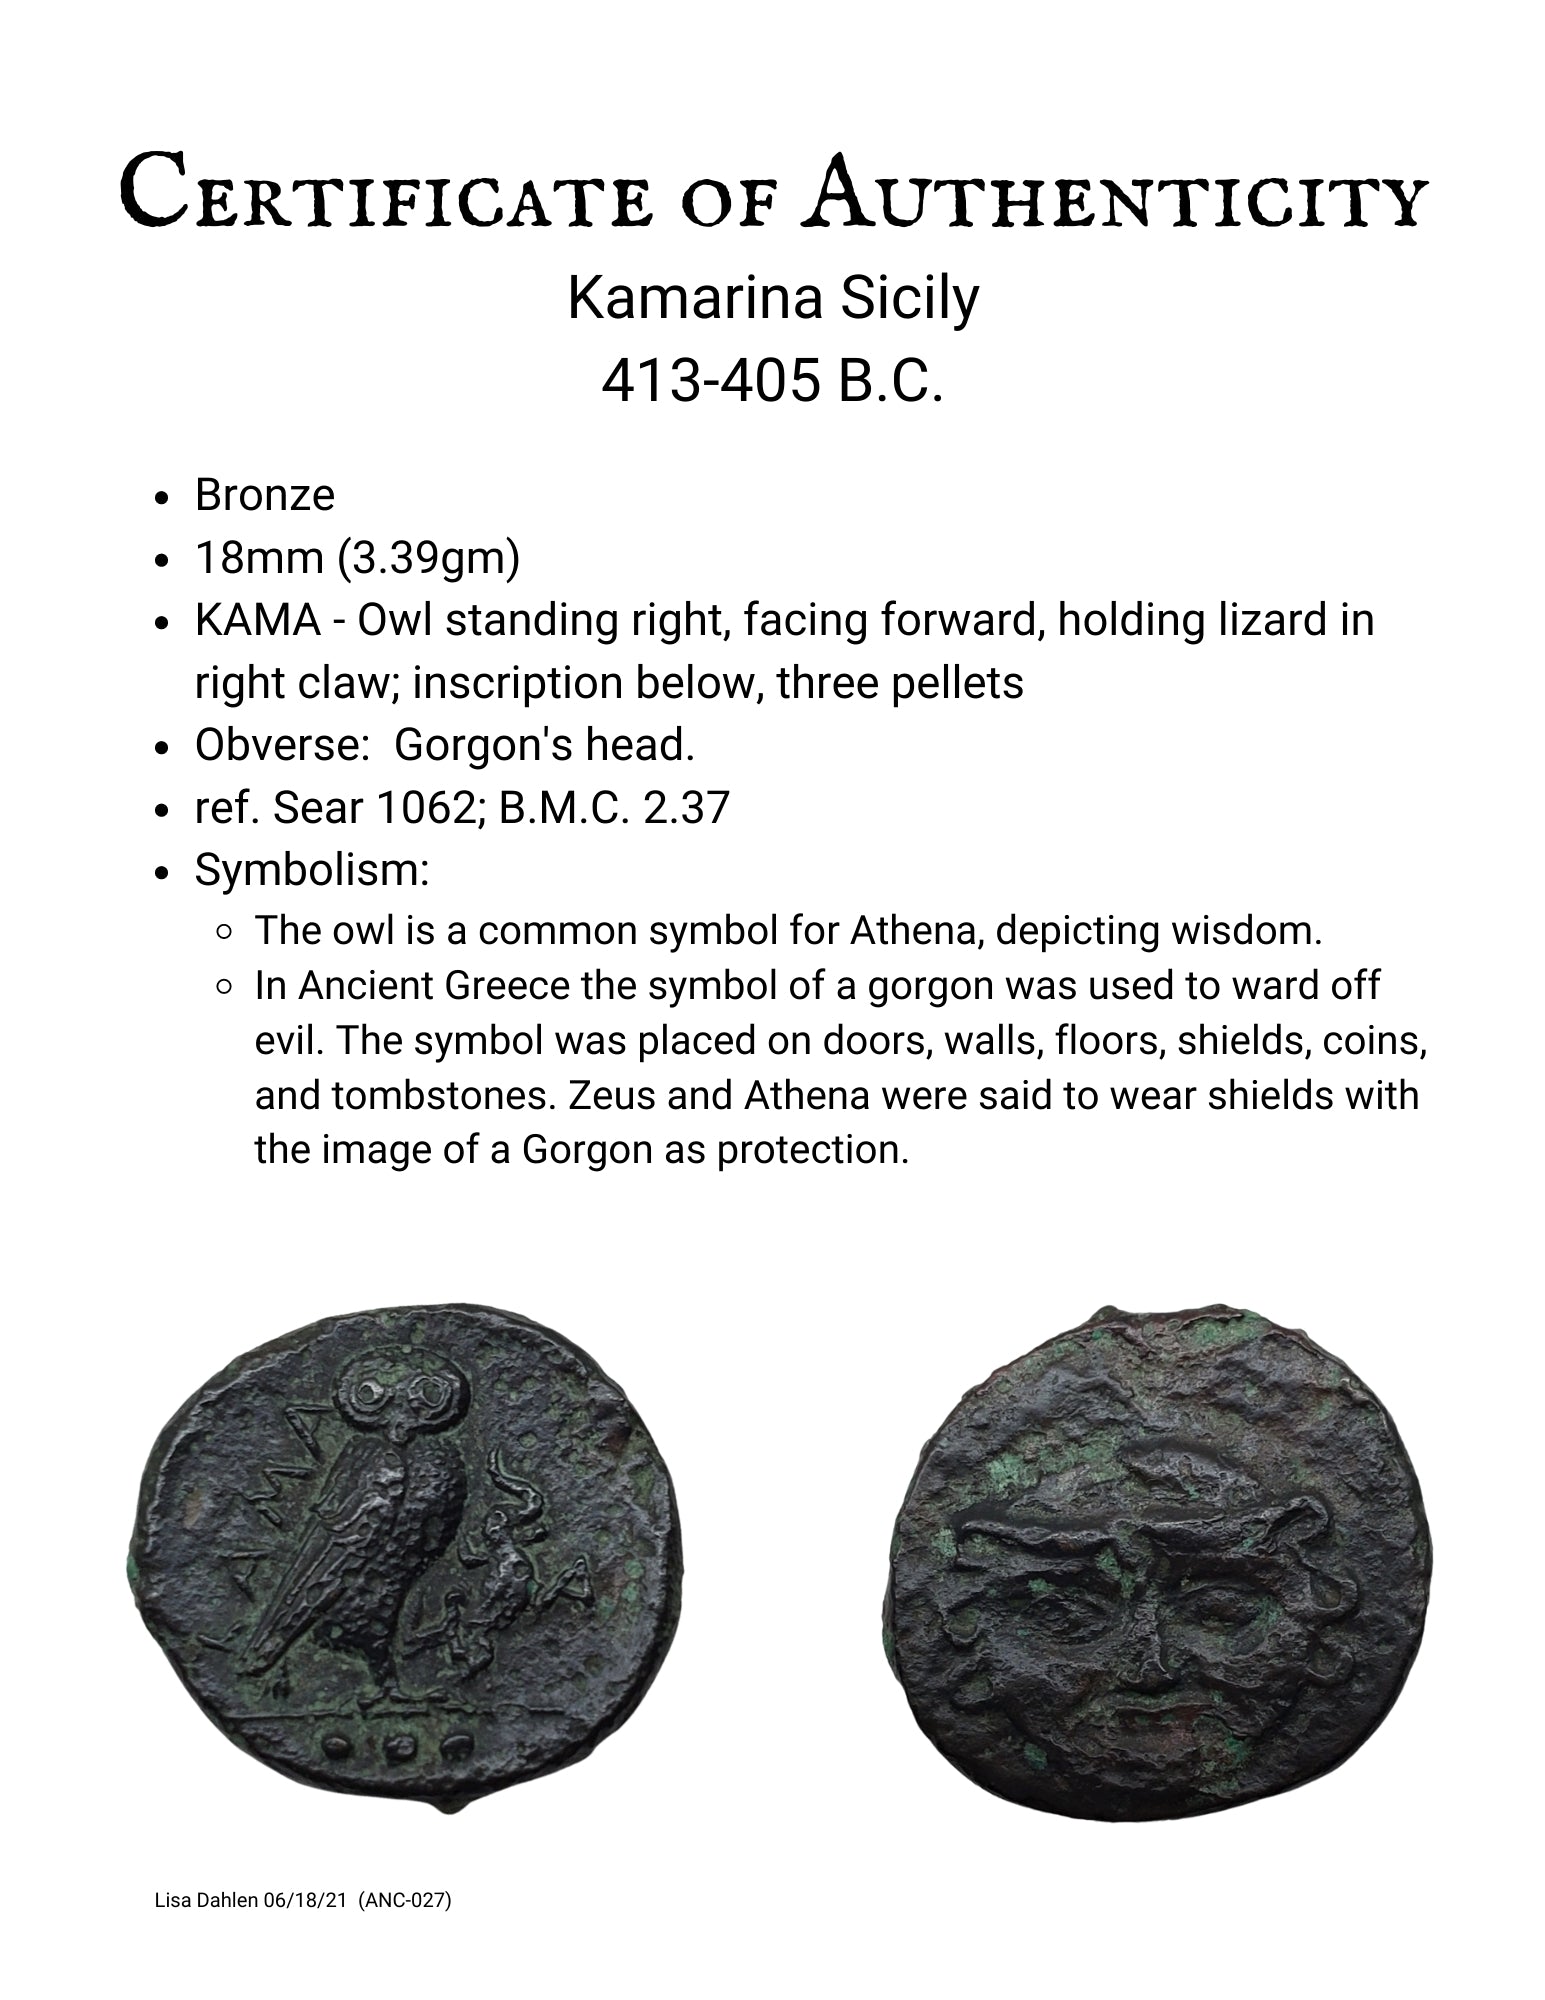 Ancient Greek bronze coin with Owl and Gorgon Kamarina Sicily Certificate  413-405 BC